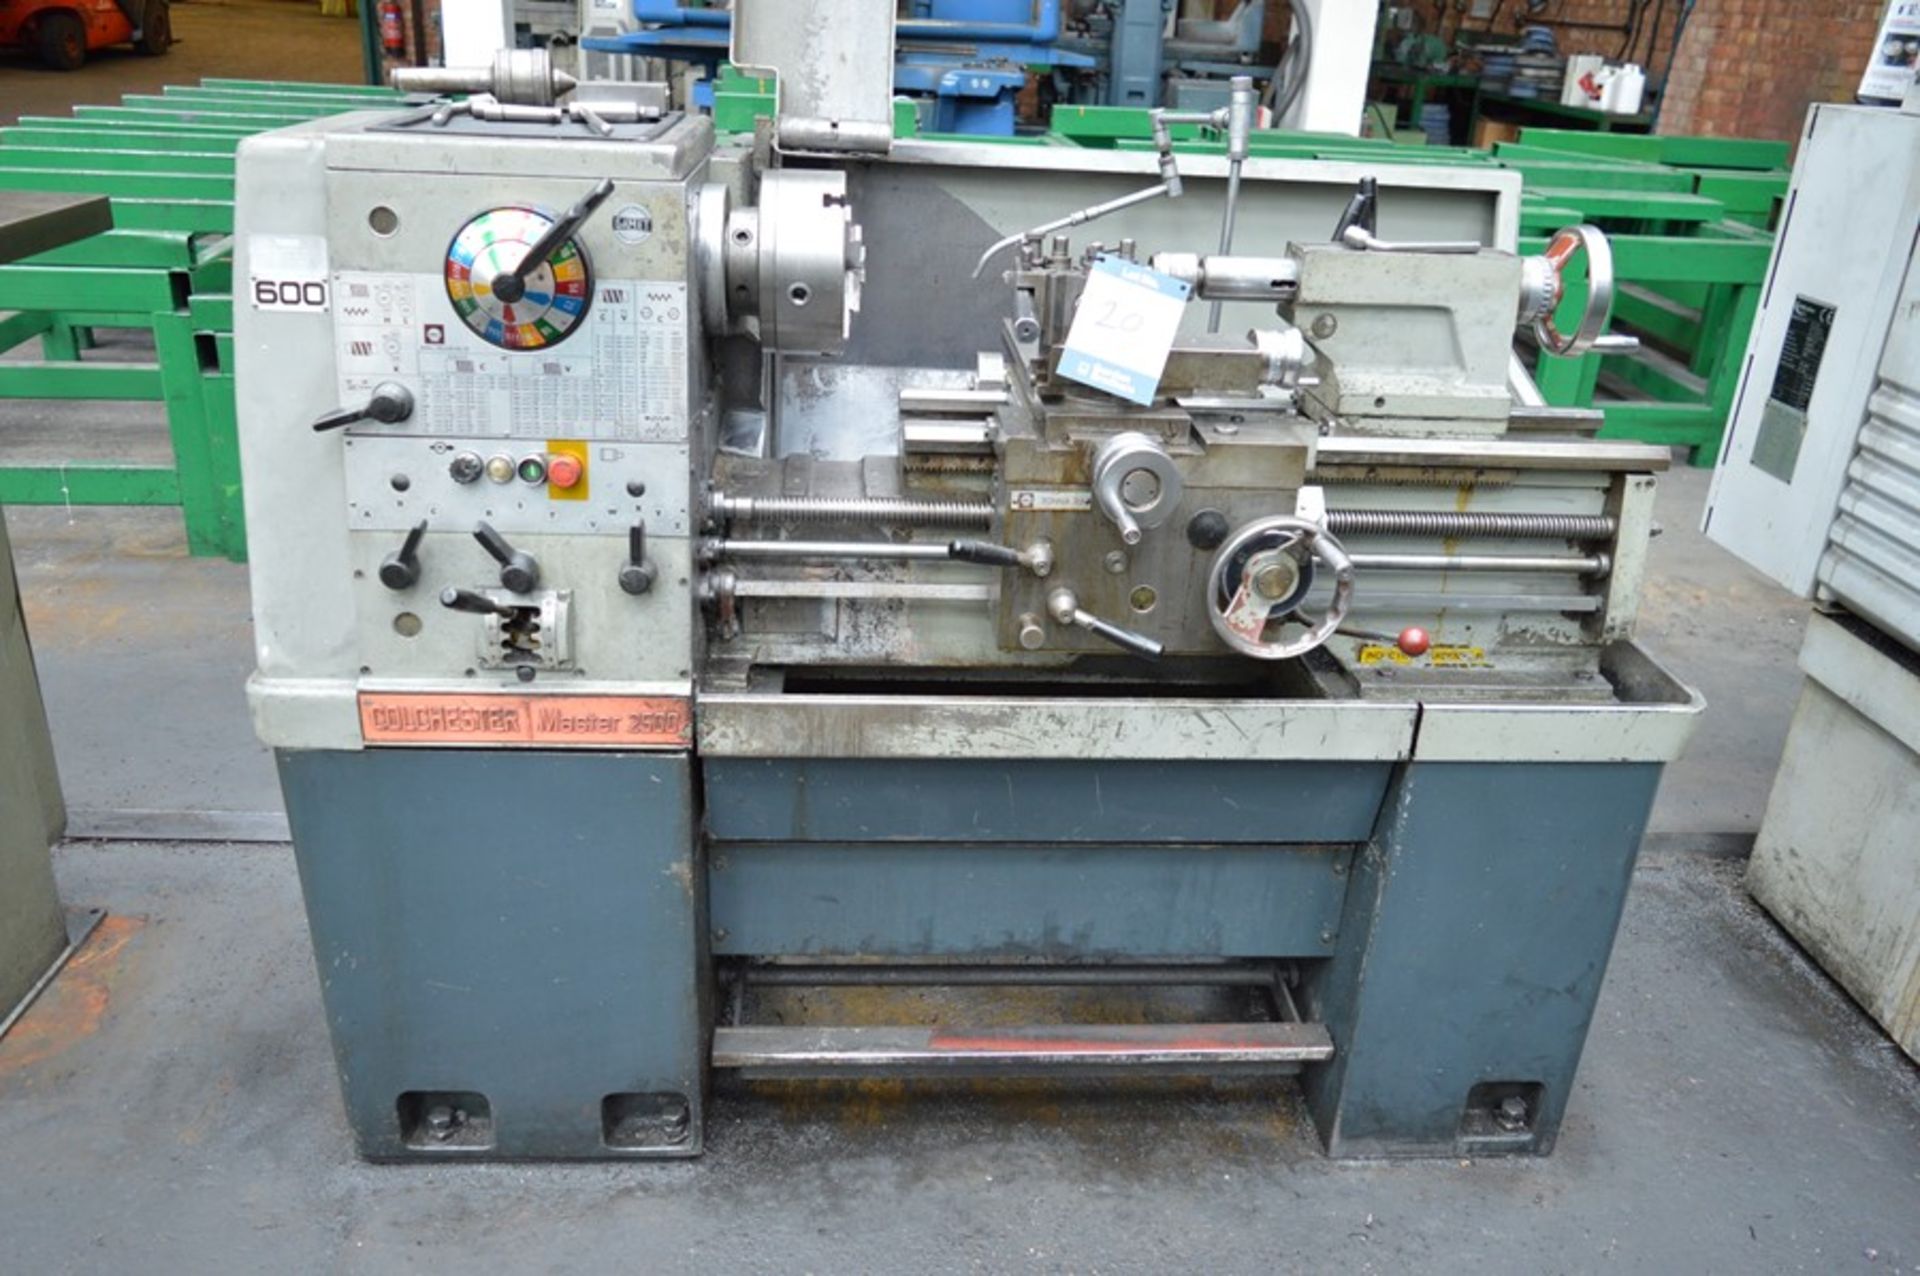 Colchester, Master 2500 gap bed centre lathe, Serial No. 5/0002/08536, distance between centres: